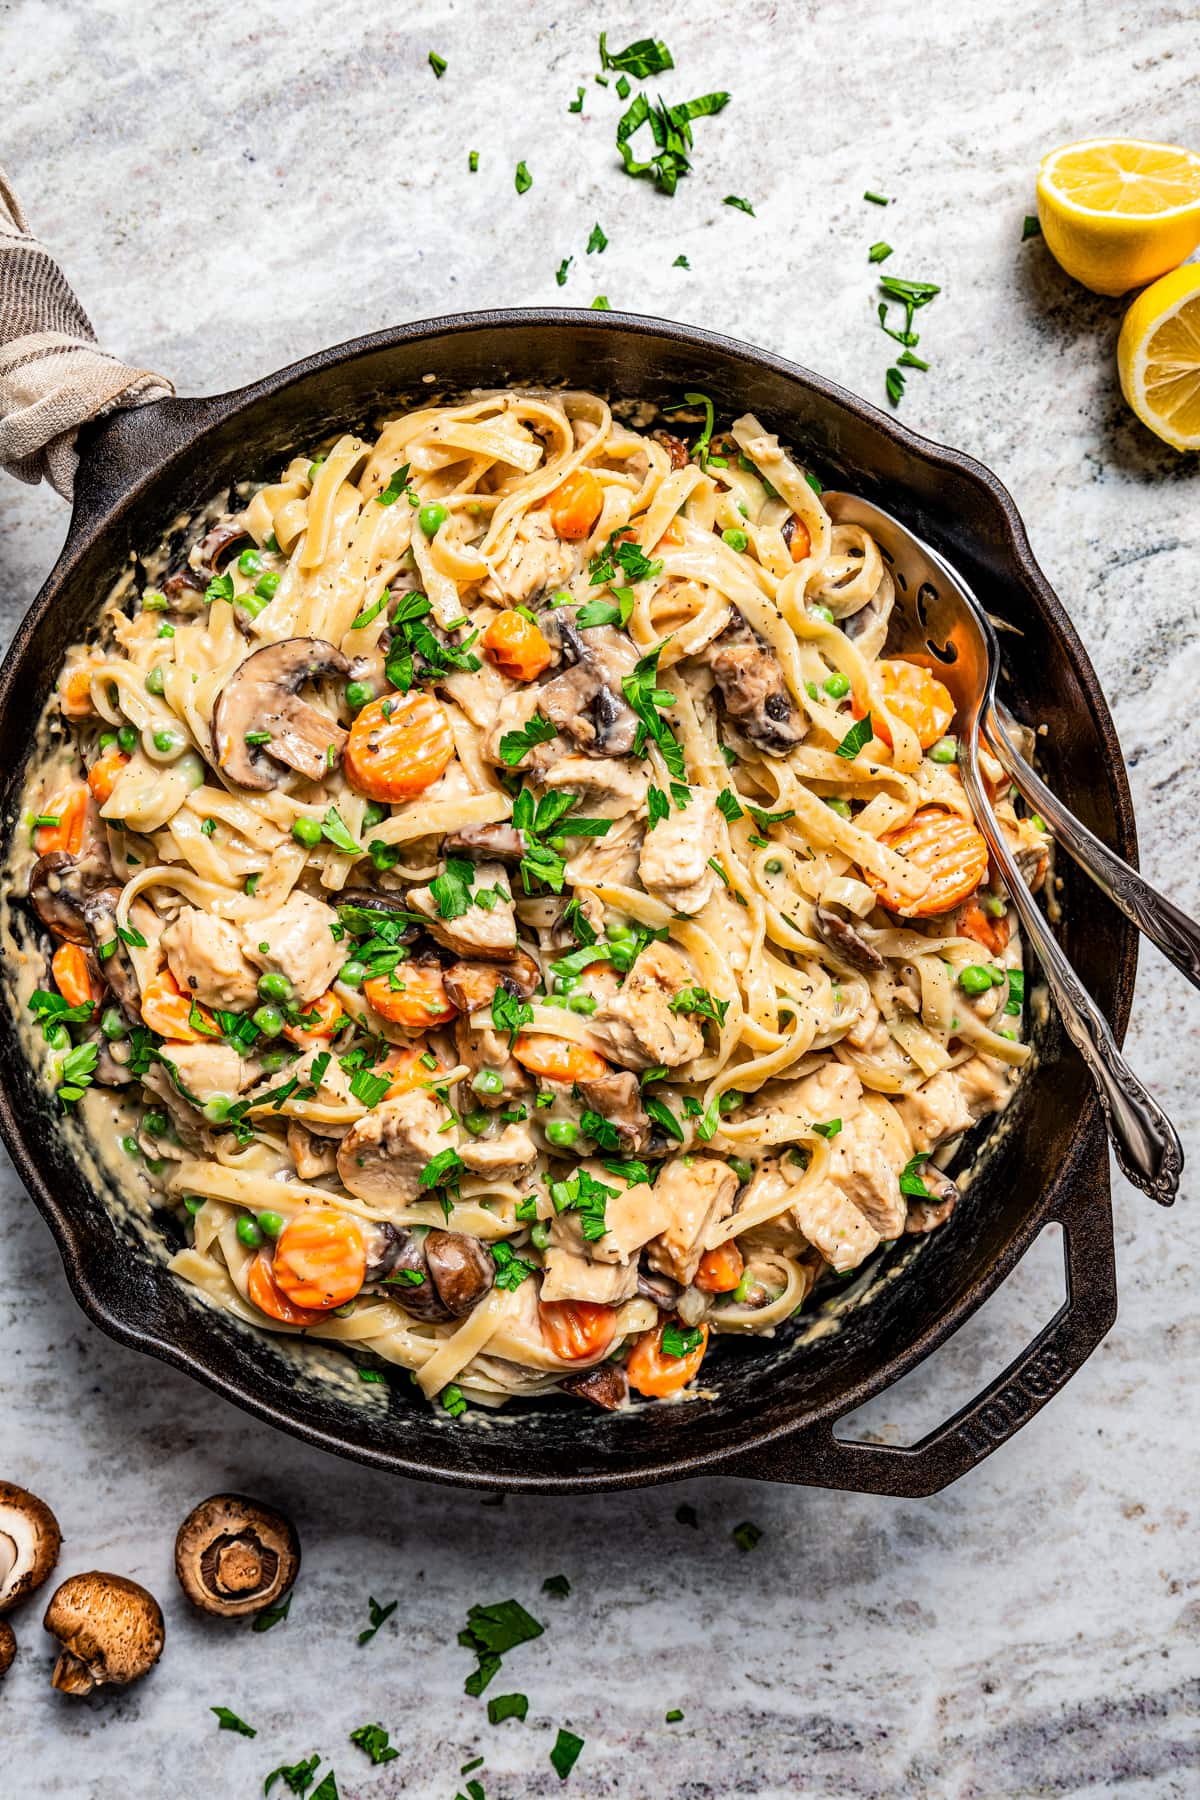 Overhead image of a cast iron skillet filled with pasta and turkey chunks in a creamy sauce.